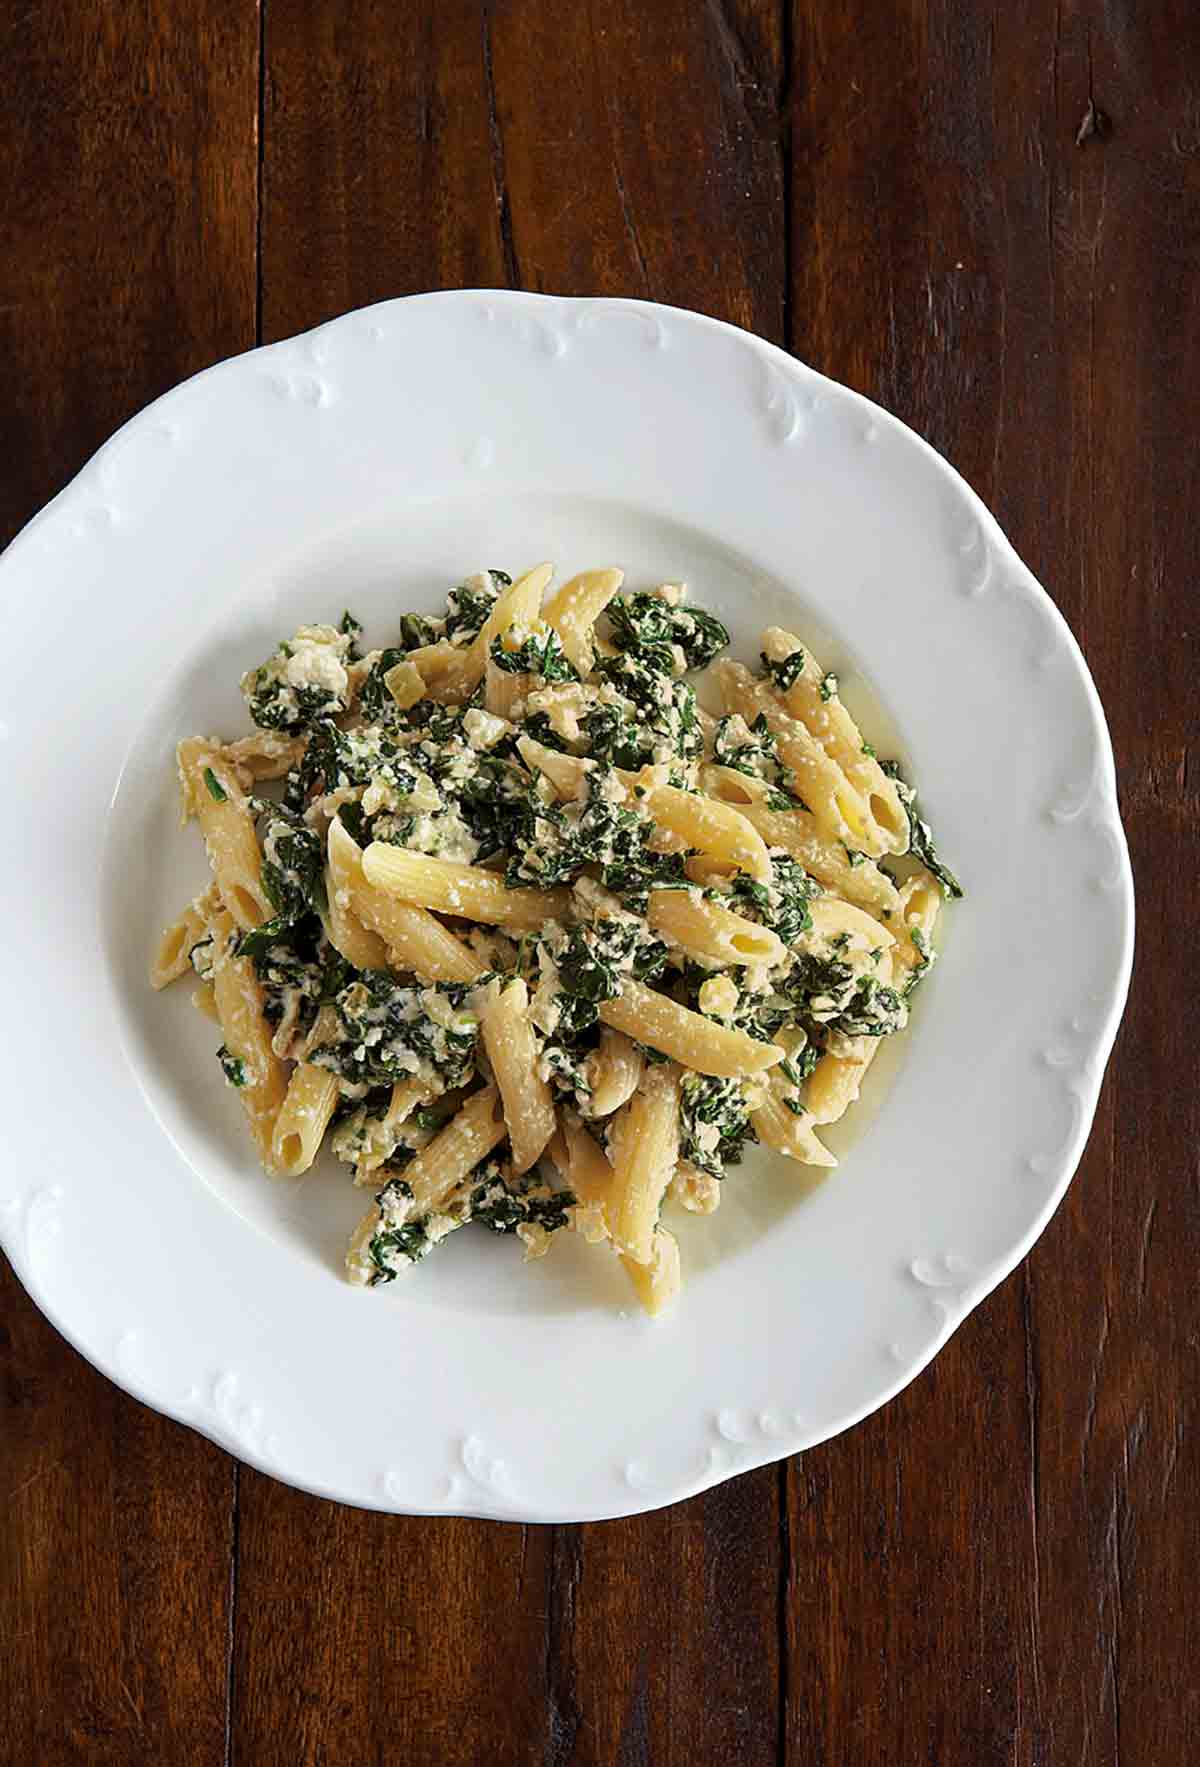 A white serving bowl filled with penne with spinach-ricotta sauce.